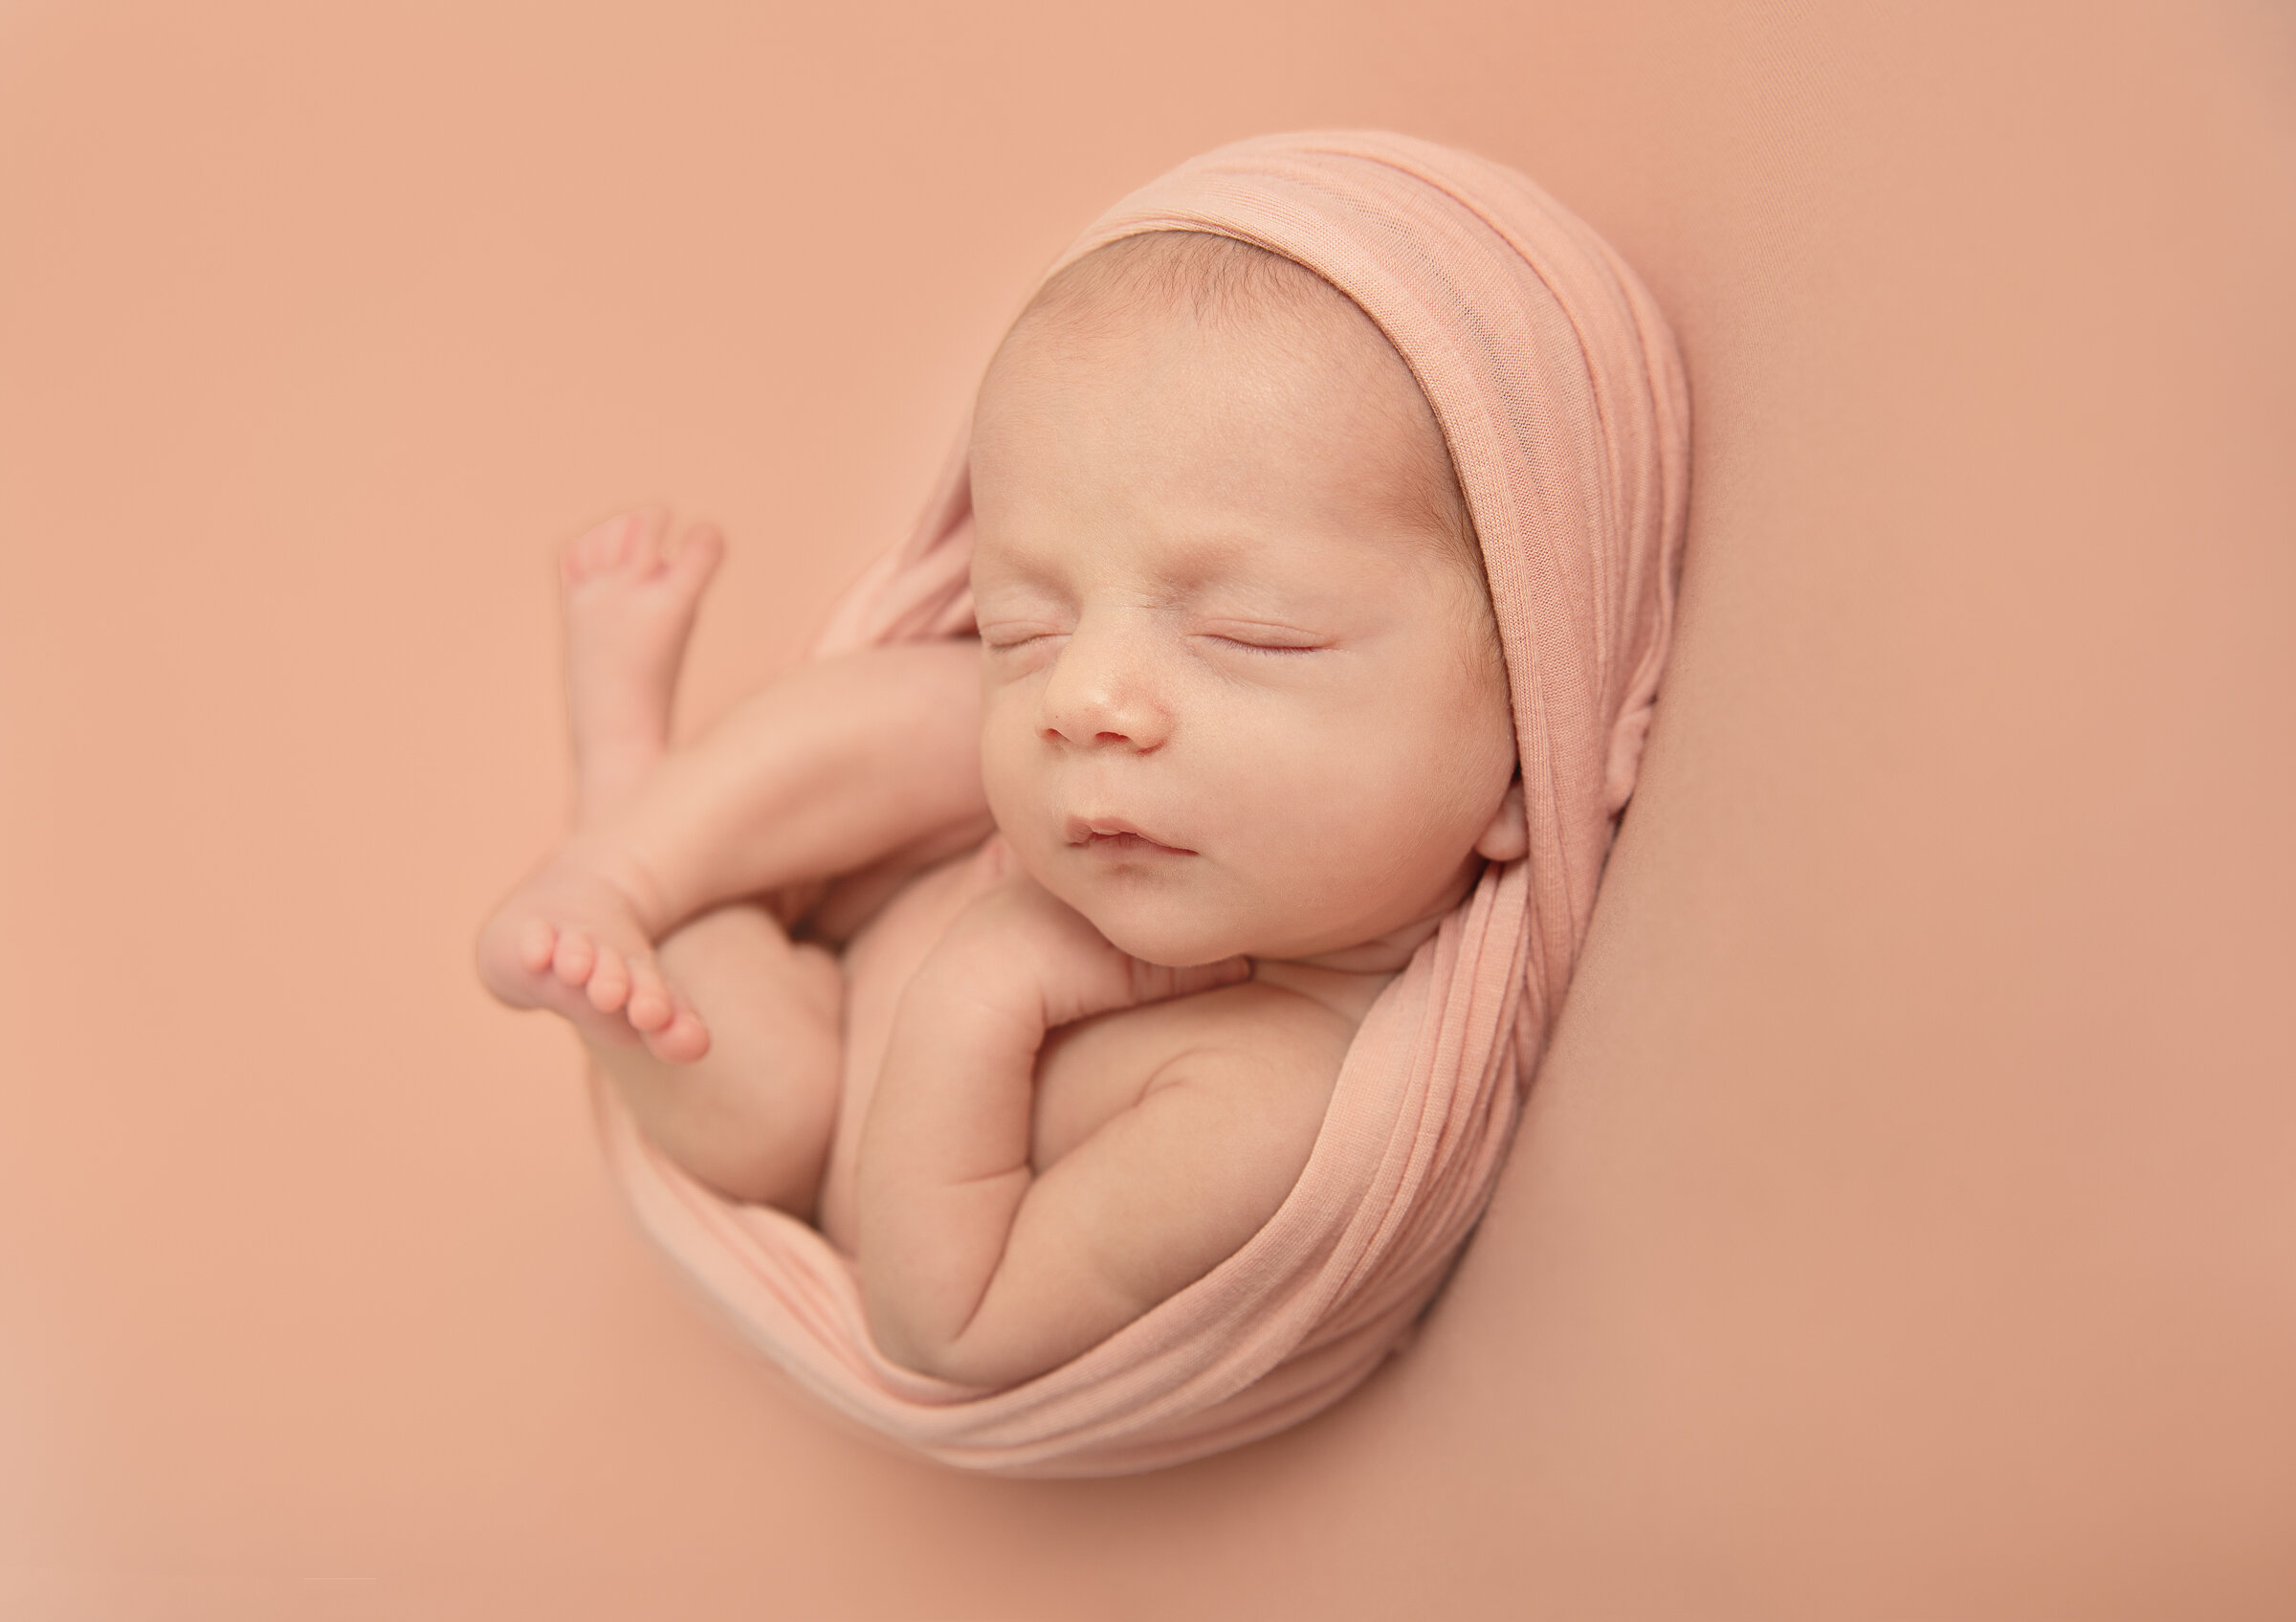 newborn-baby-wrapped-on-back-shot-from-side